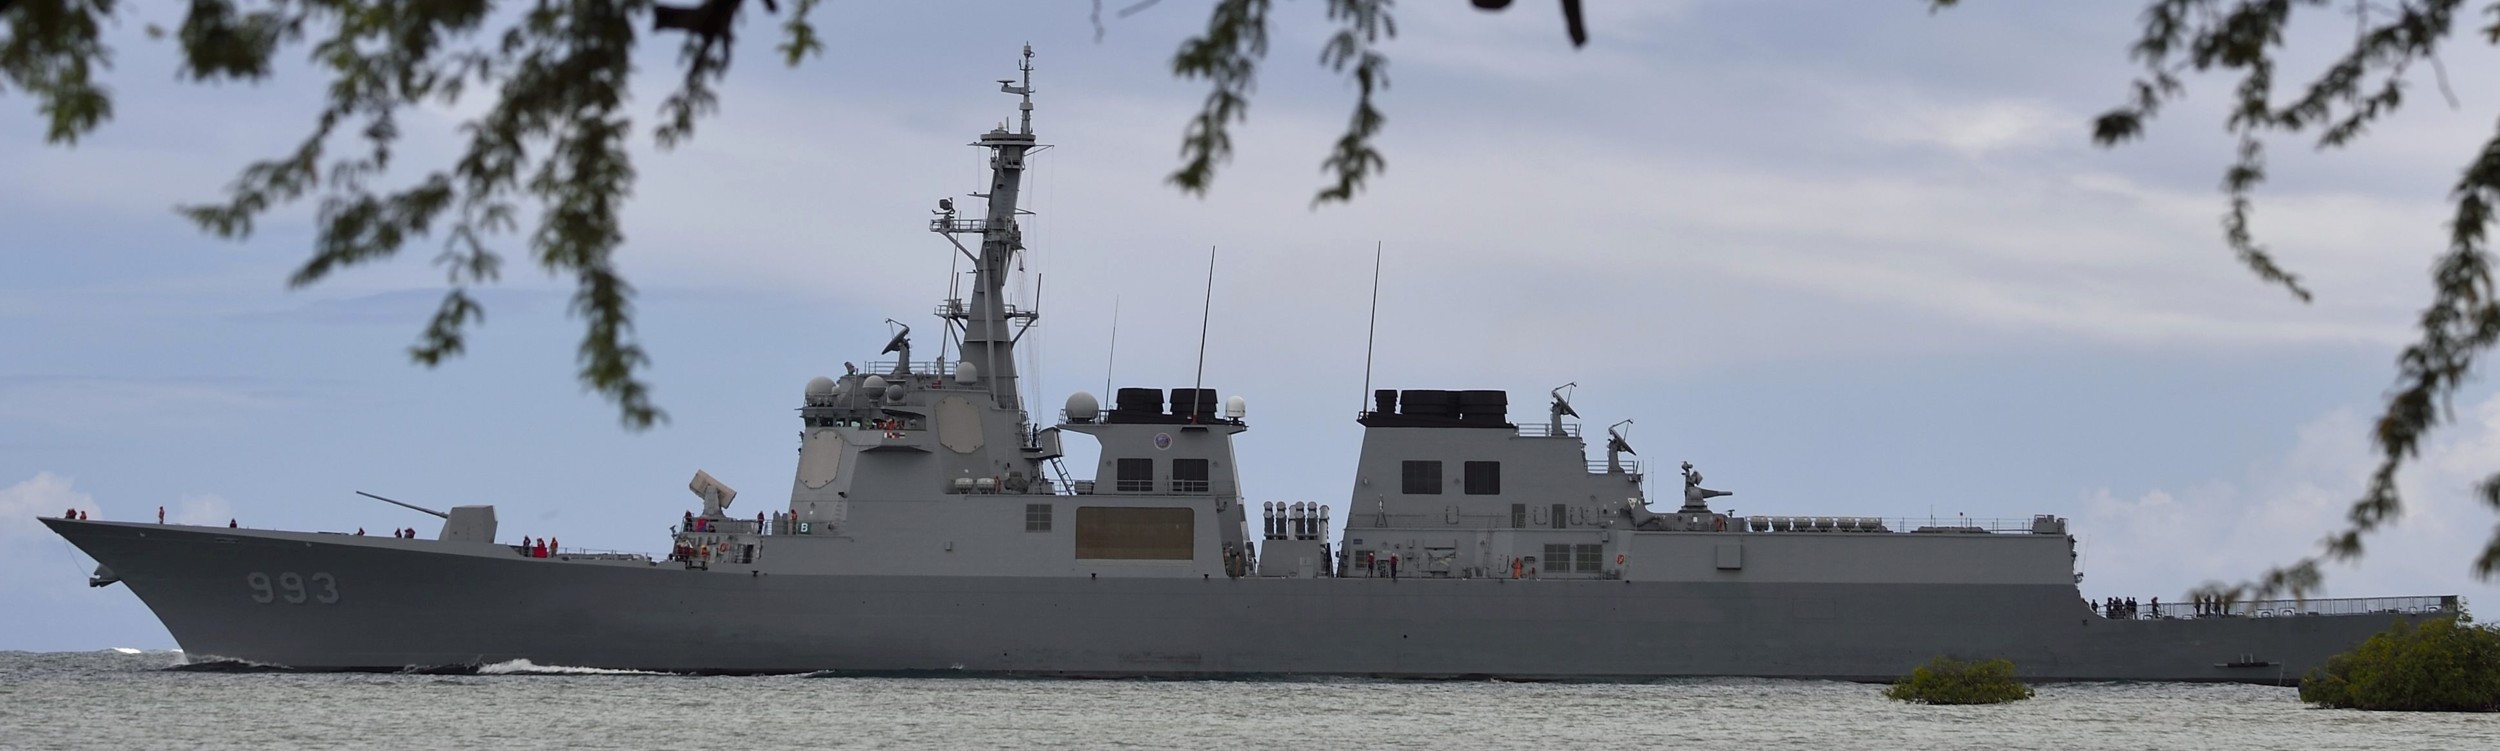 ddg-993 roks seoae ryu seong-ryong sejong the great class guided missile destroyer aegis republic of korea navy rokn 23